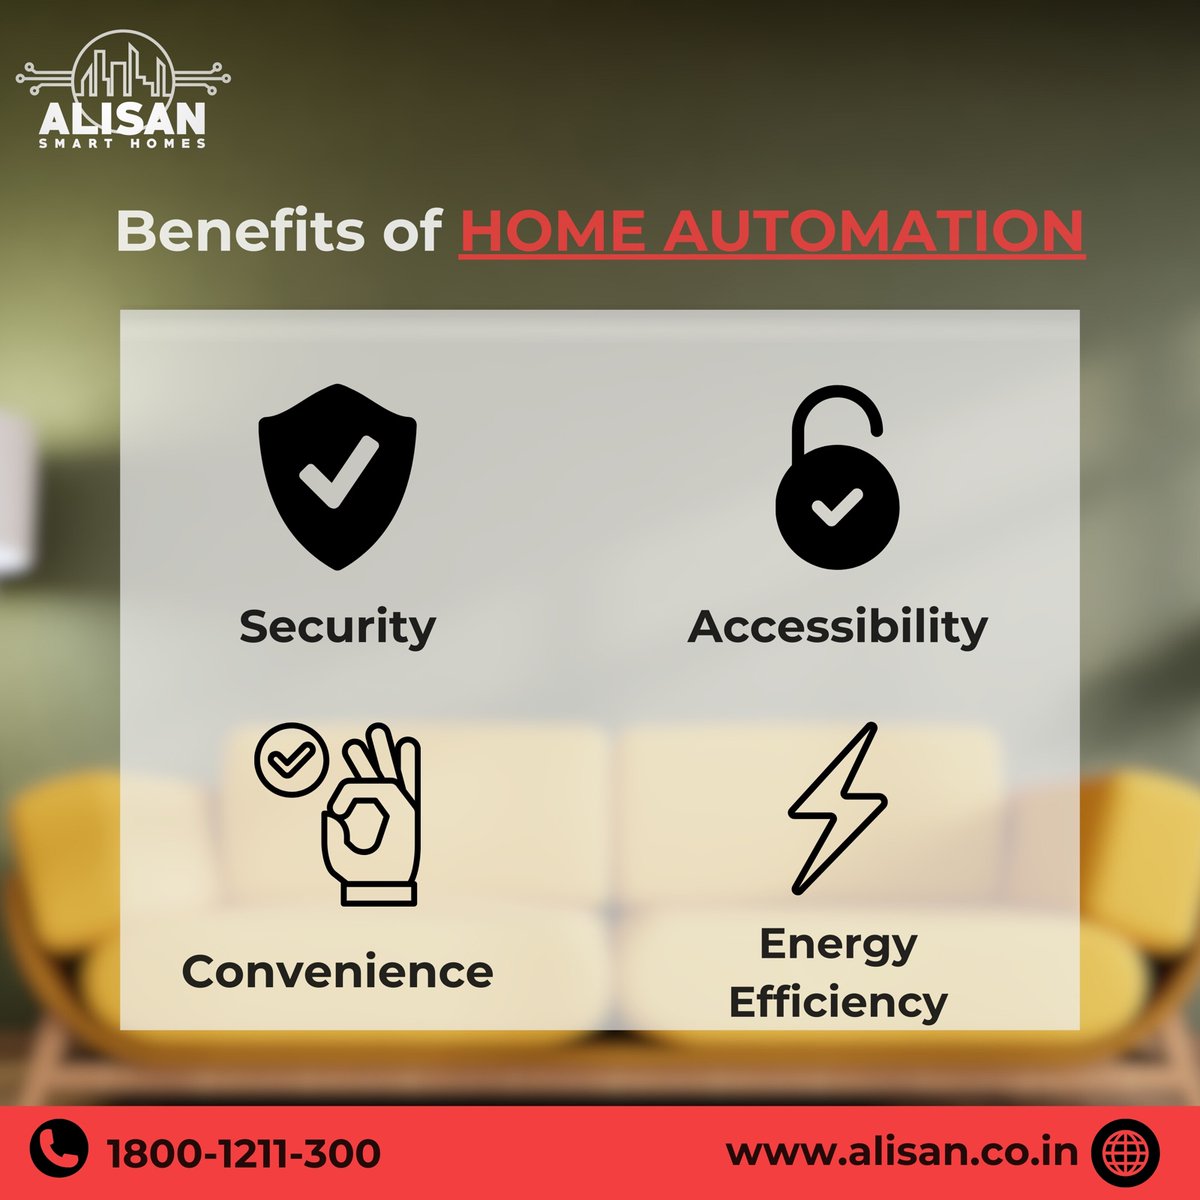 Step into the future with Alisan Smart Homes! Discover the endless benefits of home automation: convenience, security, energy efficiency, and more. #HomeAutomation #SmartLiving #Convenience #Security #EnergyEfficiency #Innovation #FutureTech #ConnectedHome #SustainableLiving